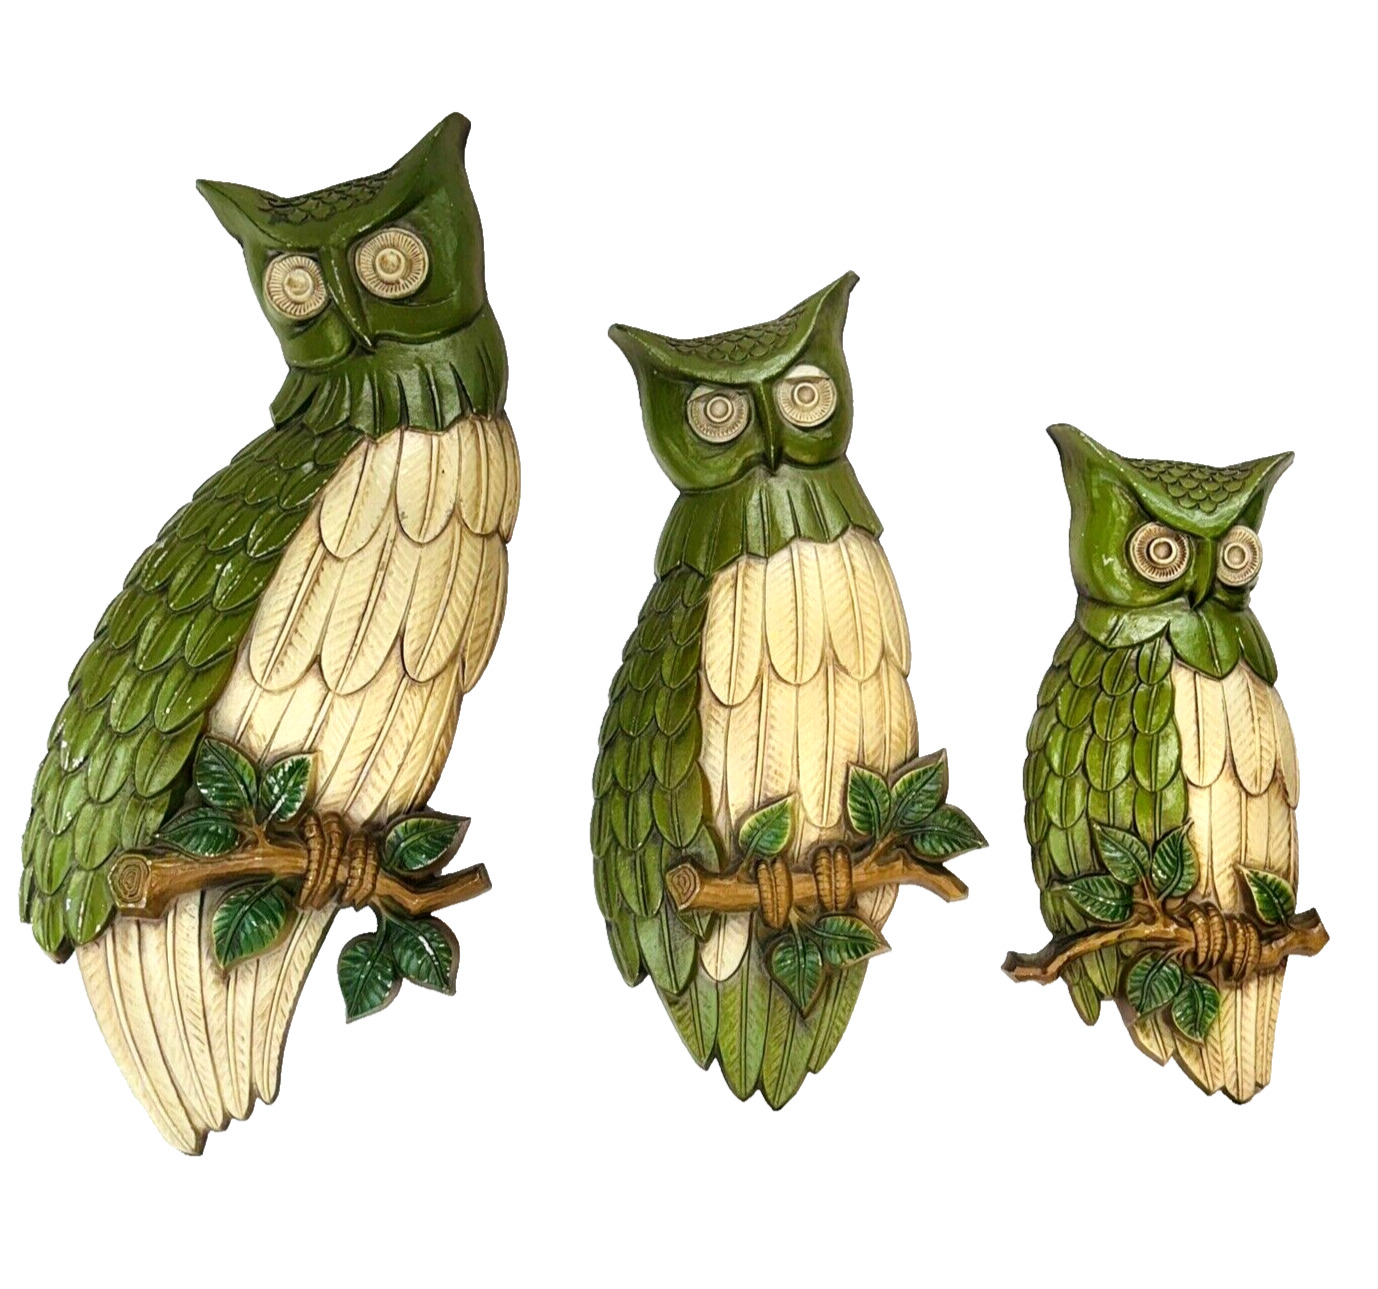 Vintage 1969 Sexton Cast Metal Perched Owls On Branches Wall Hangings Set Of 3